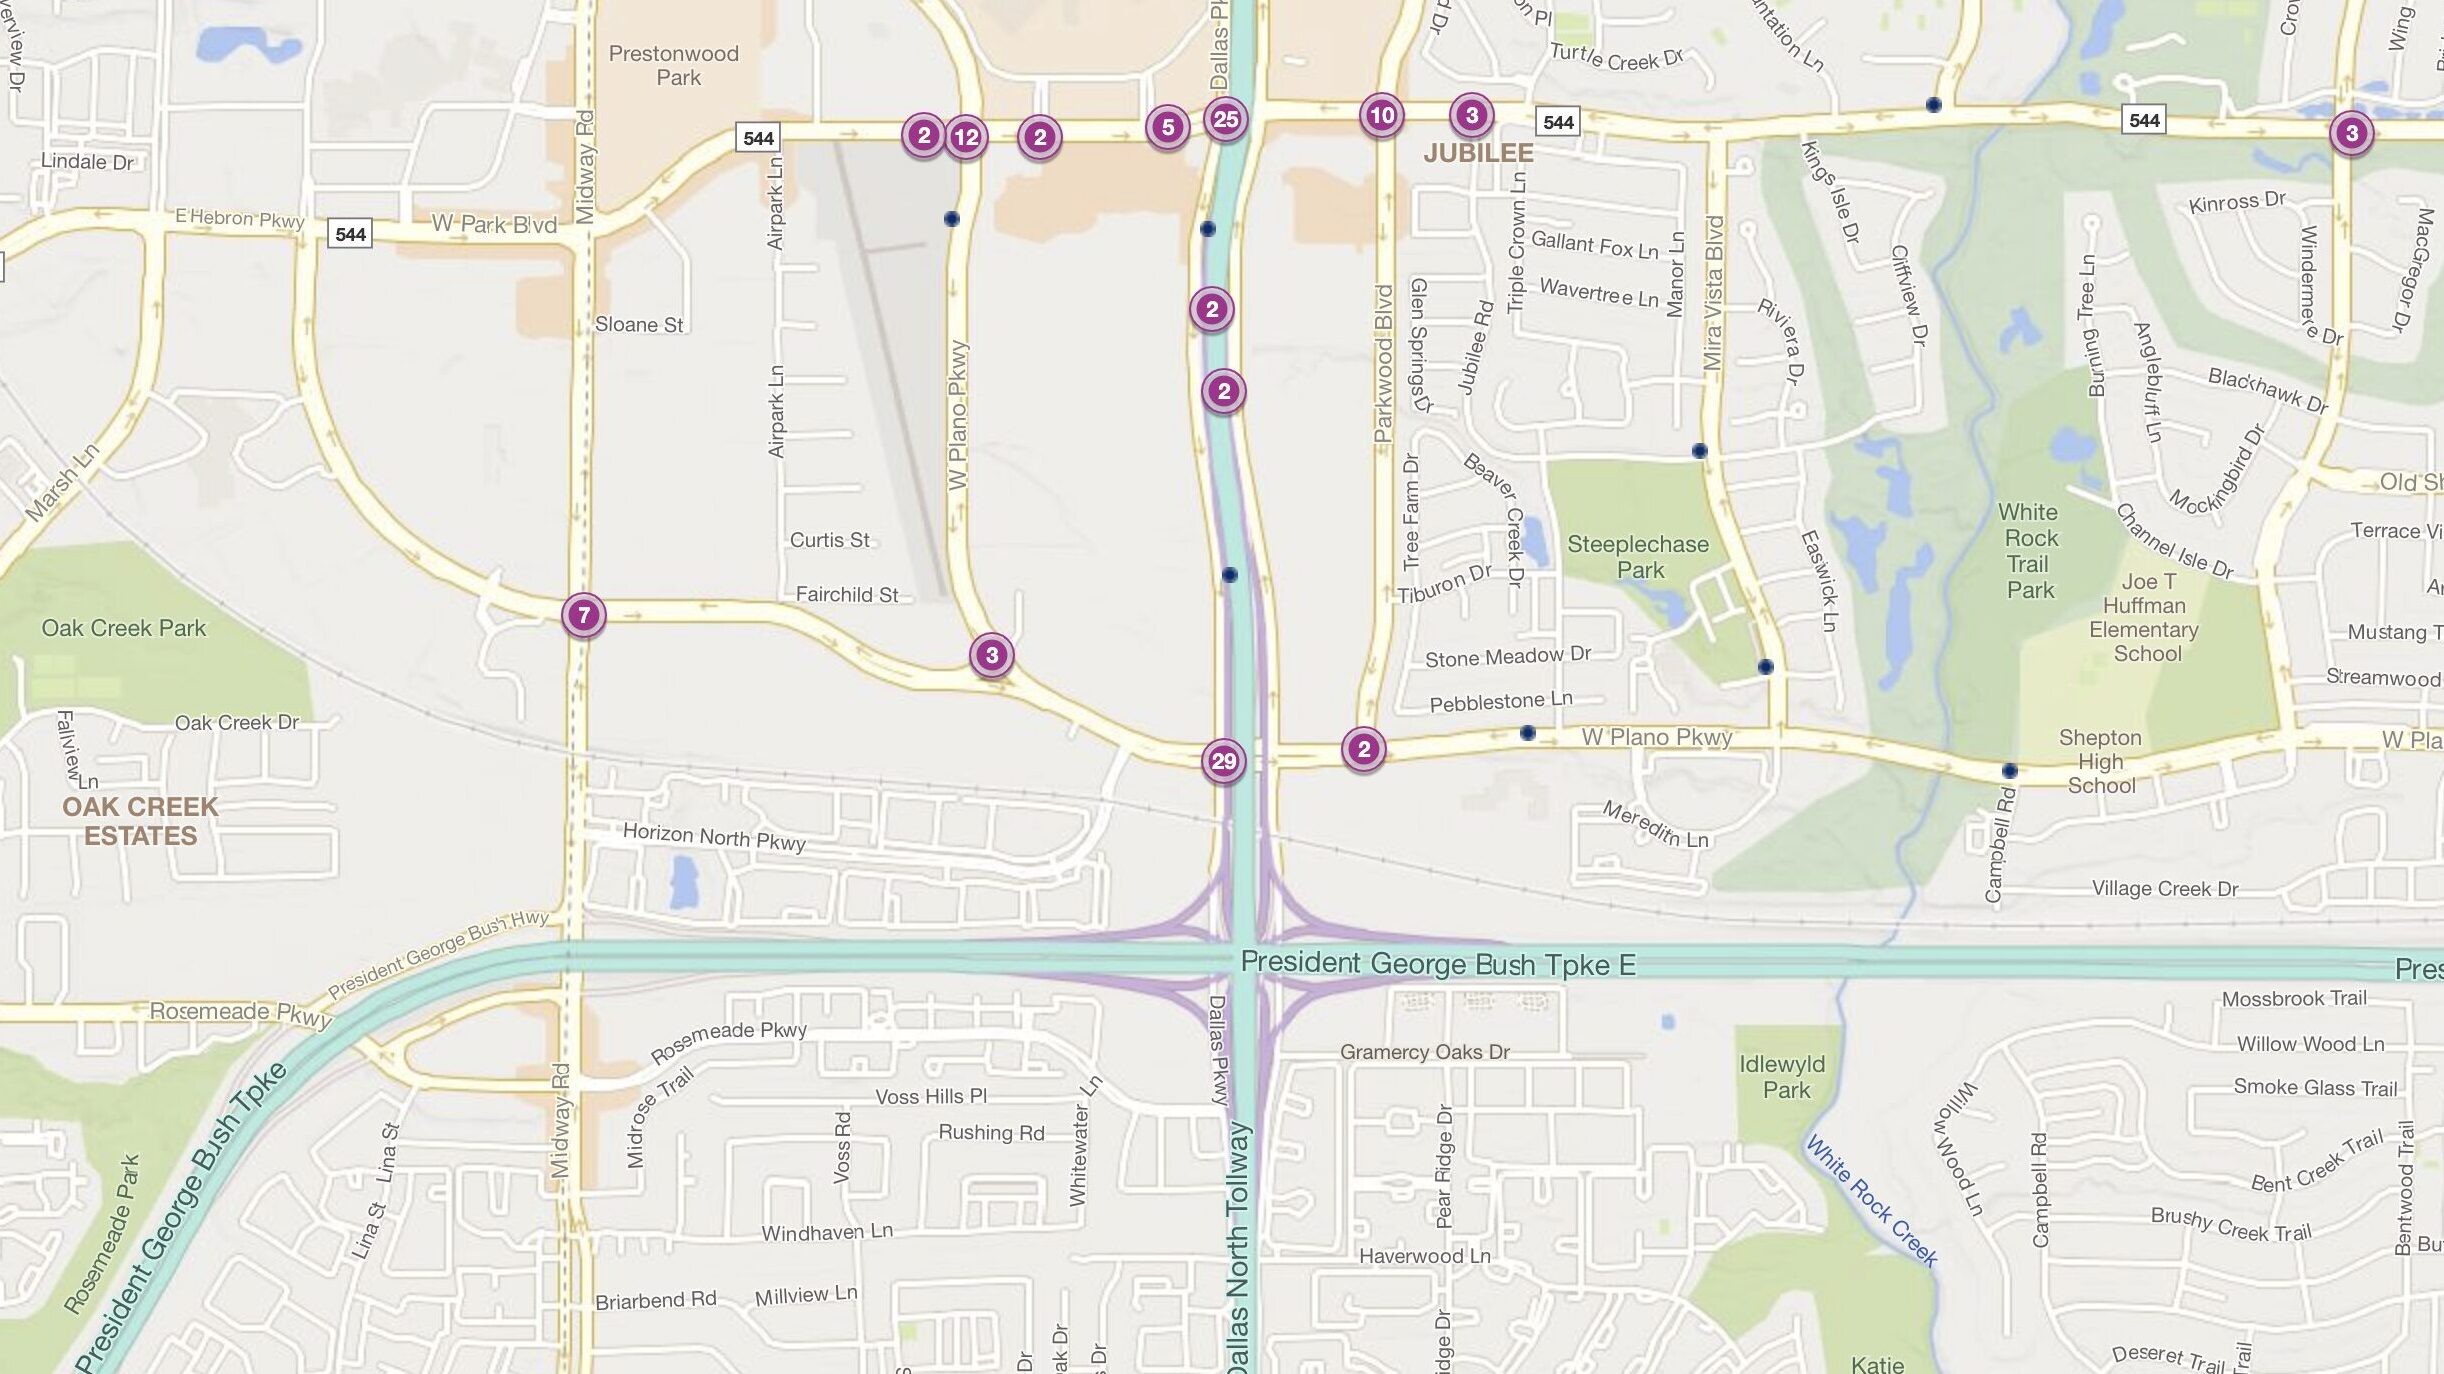 Cluster Map of 2023 Car Accidents at Dallas North Tollway & W. Plano Pkwy. (TXDOT)